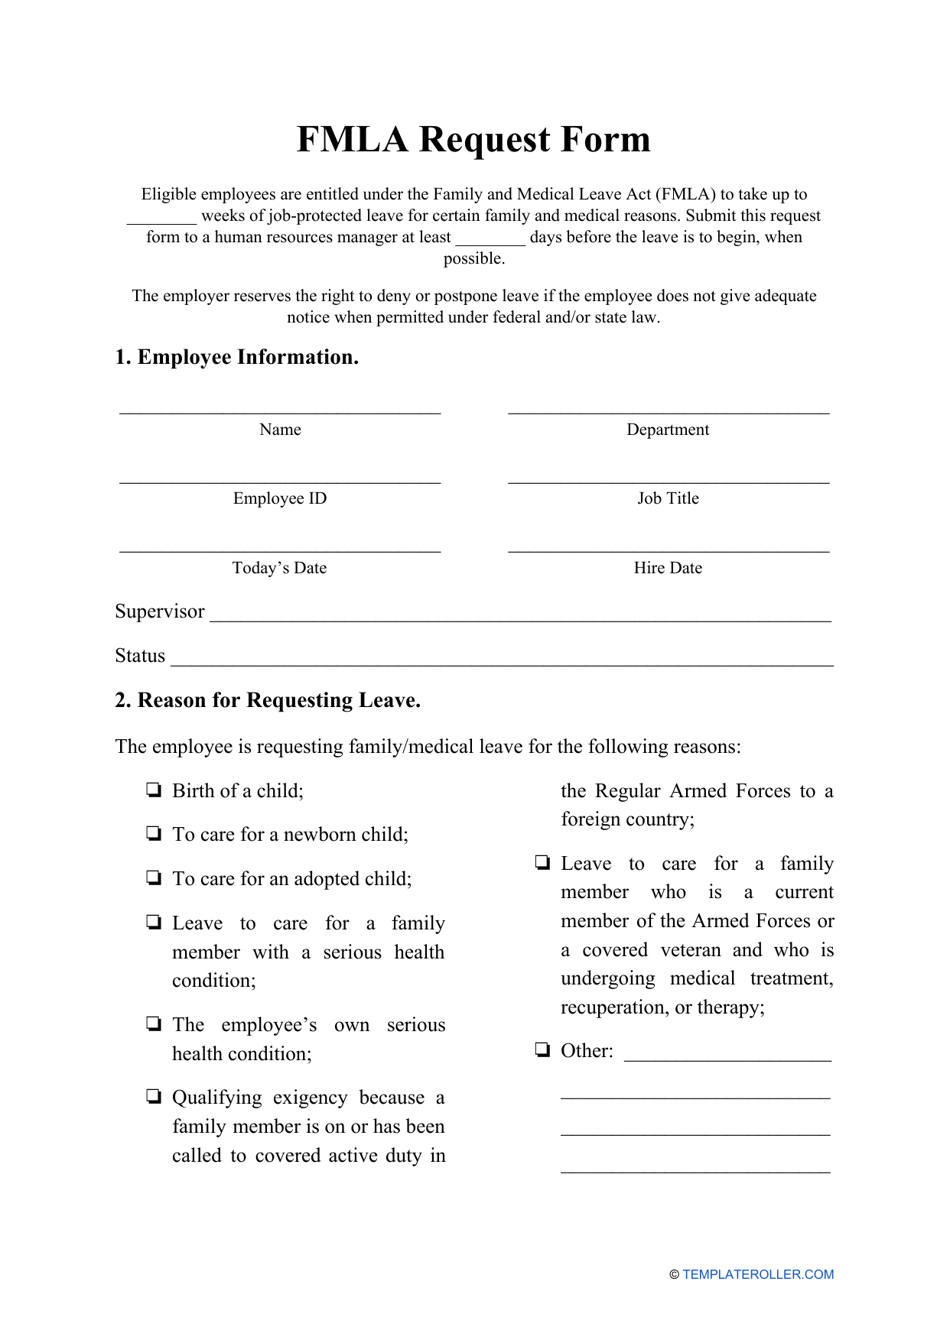 Fmla Request Form Fill Out, Sign Online and Download PDF Templateroller